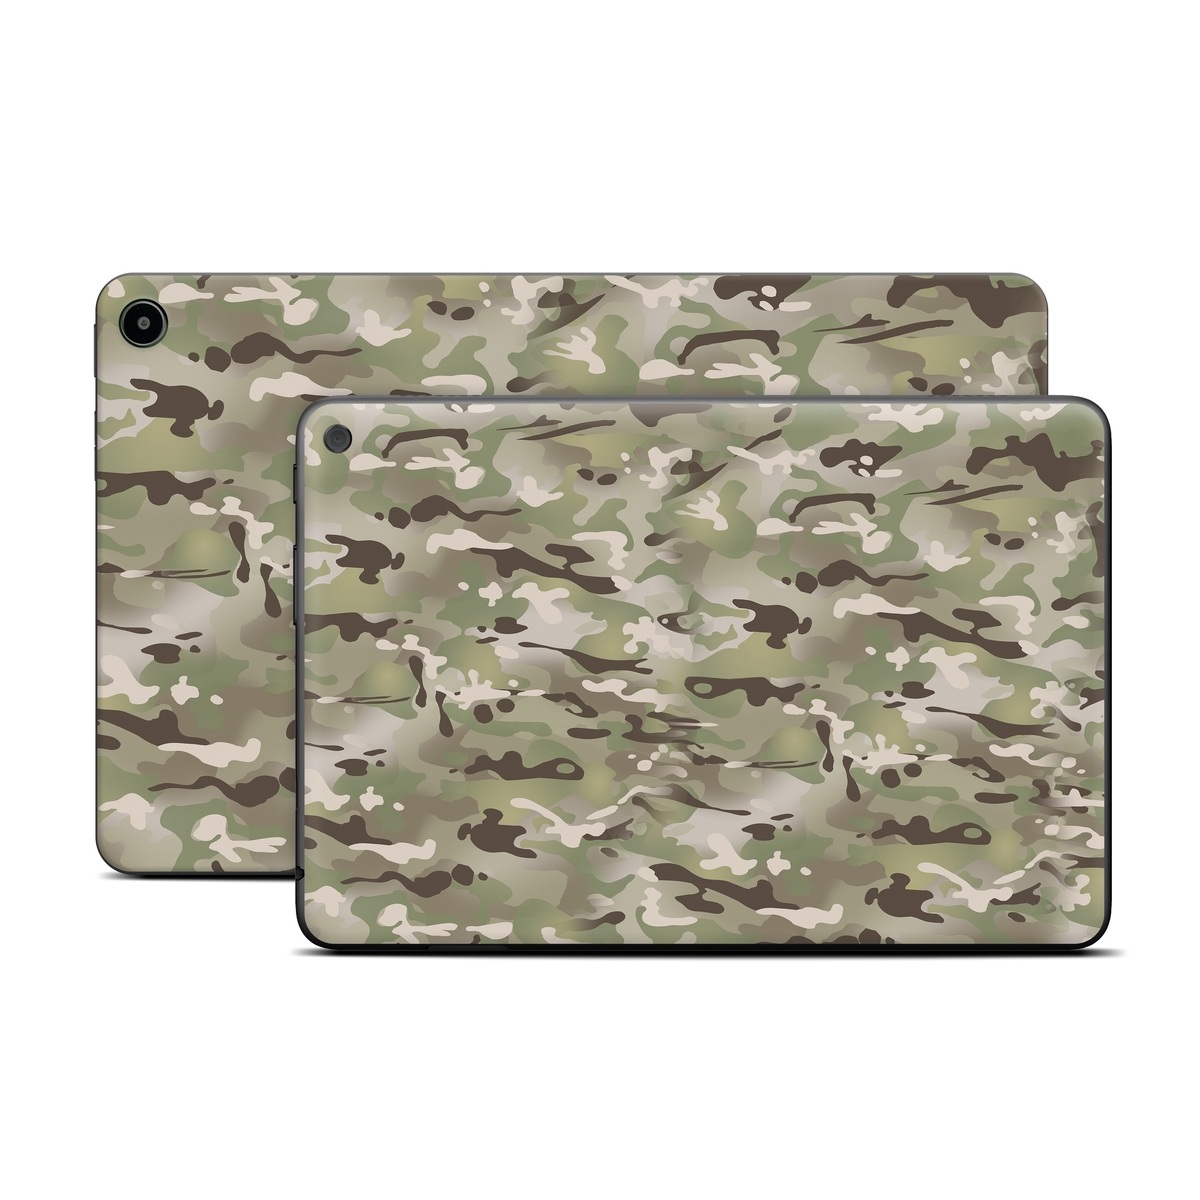 Amazon Fire Tablet Series Skin Skin design of Military camouflage, Camouflage, Pattern, Clothing, Uniform, Design, Military uniform, Bed sheet, with gray, green, black, red colors